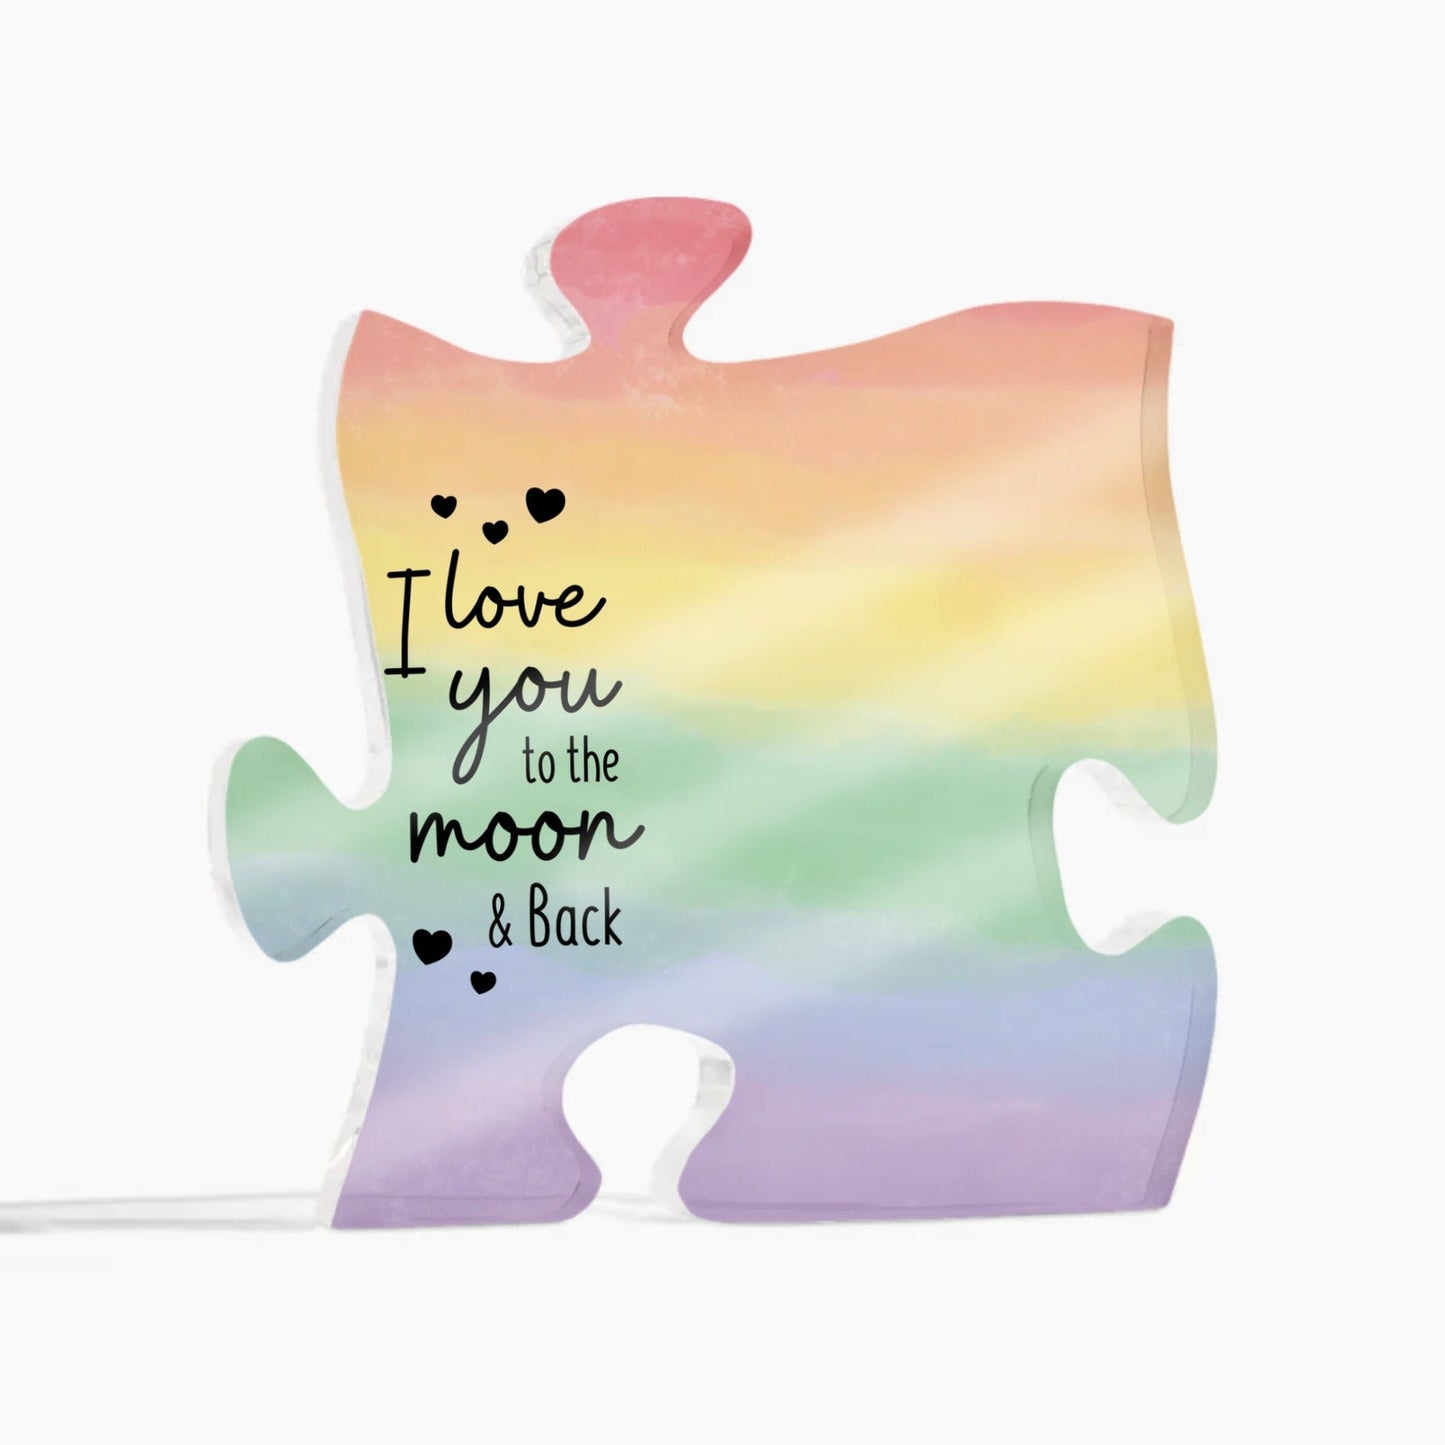 Personalized For You Acrylic "I love you to the moon and back" puzzle piece